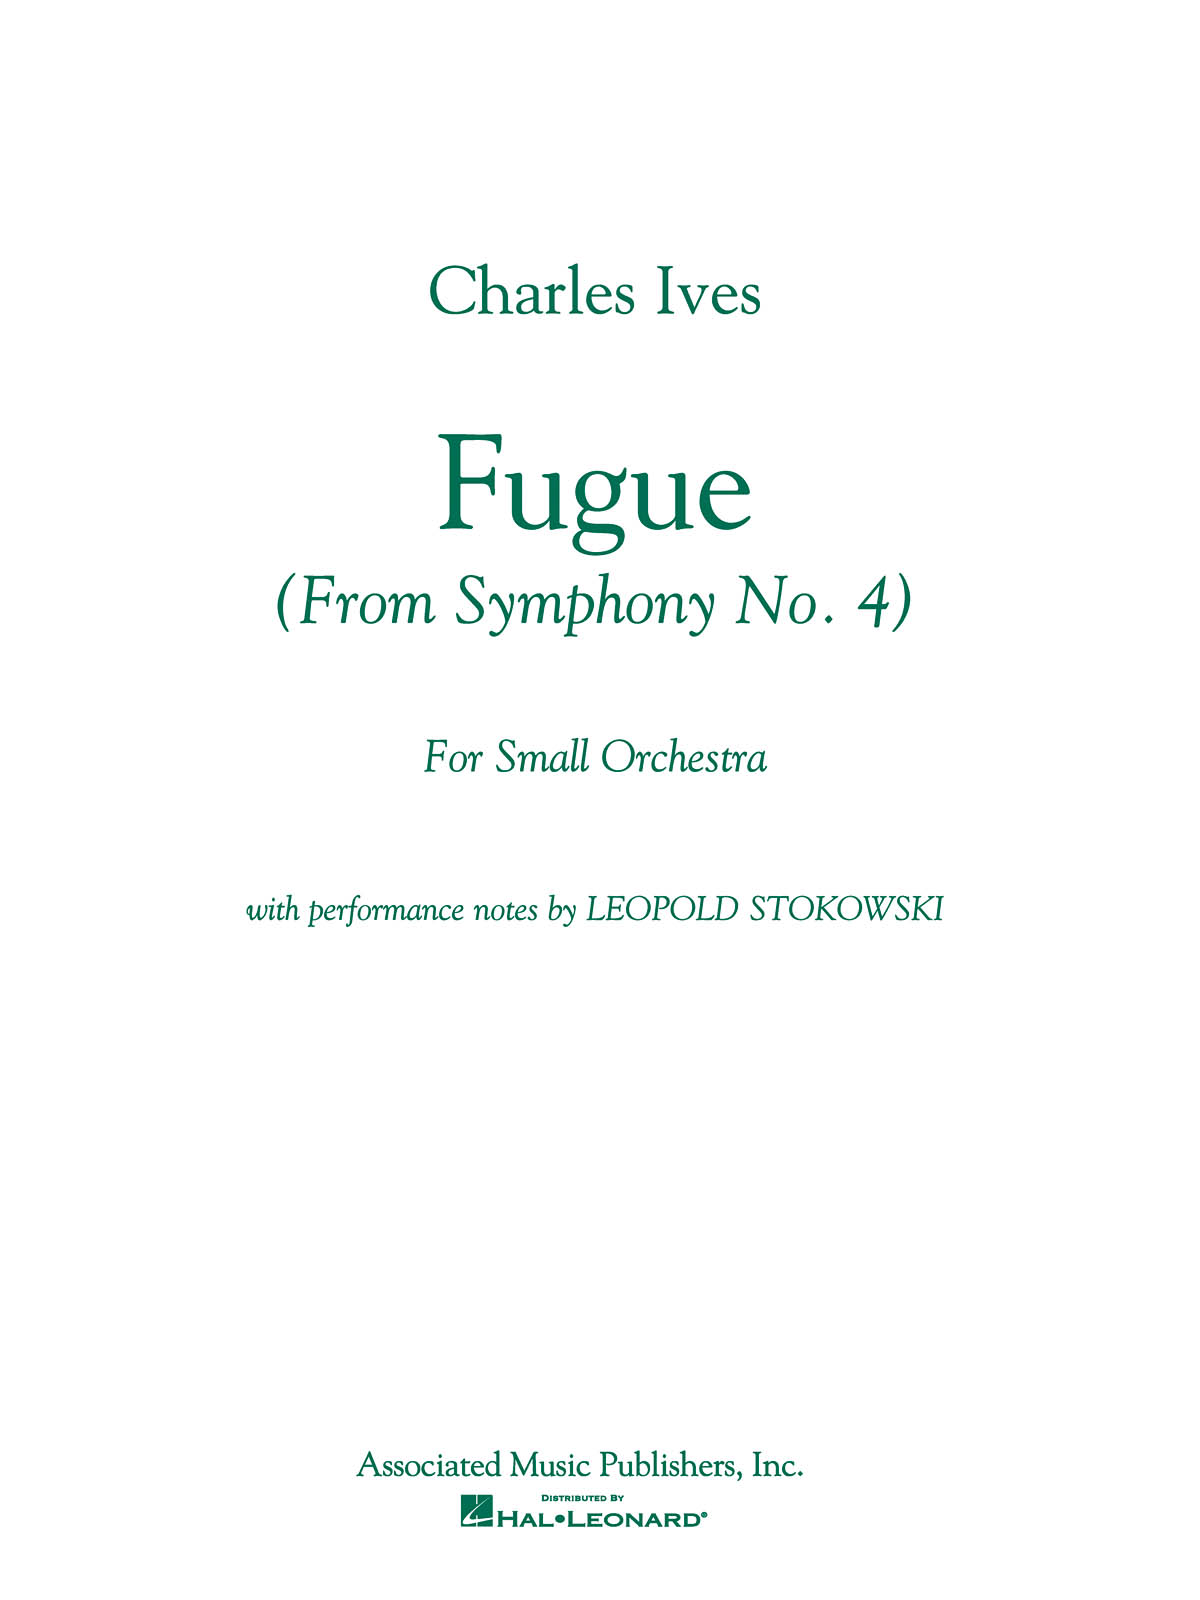 Charles E. Ives: Fugue (from Symphony No. 4): Concert Band: Score and Parts